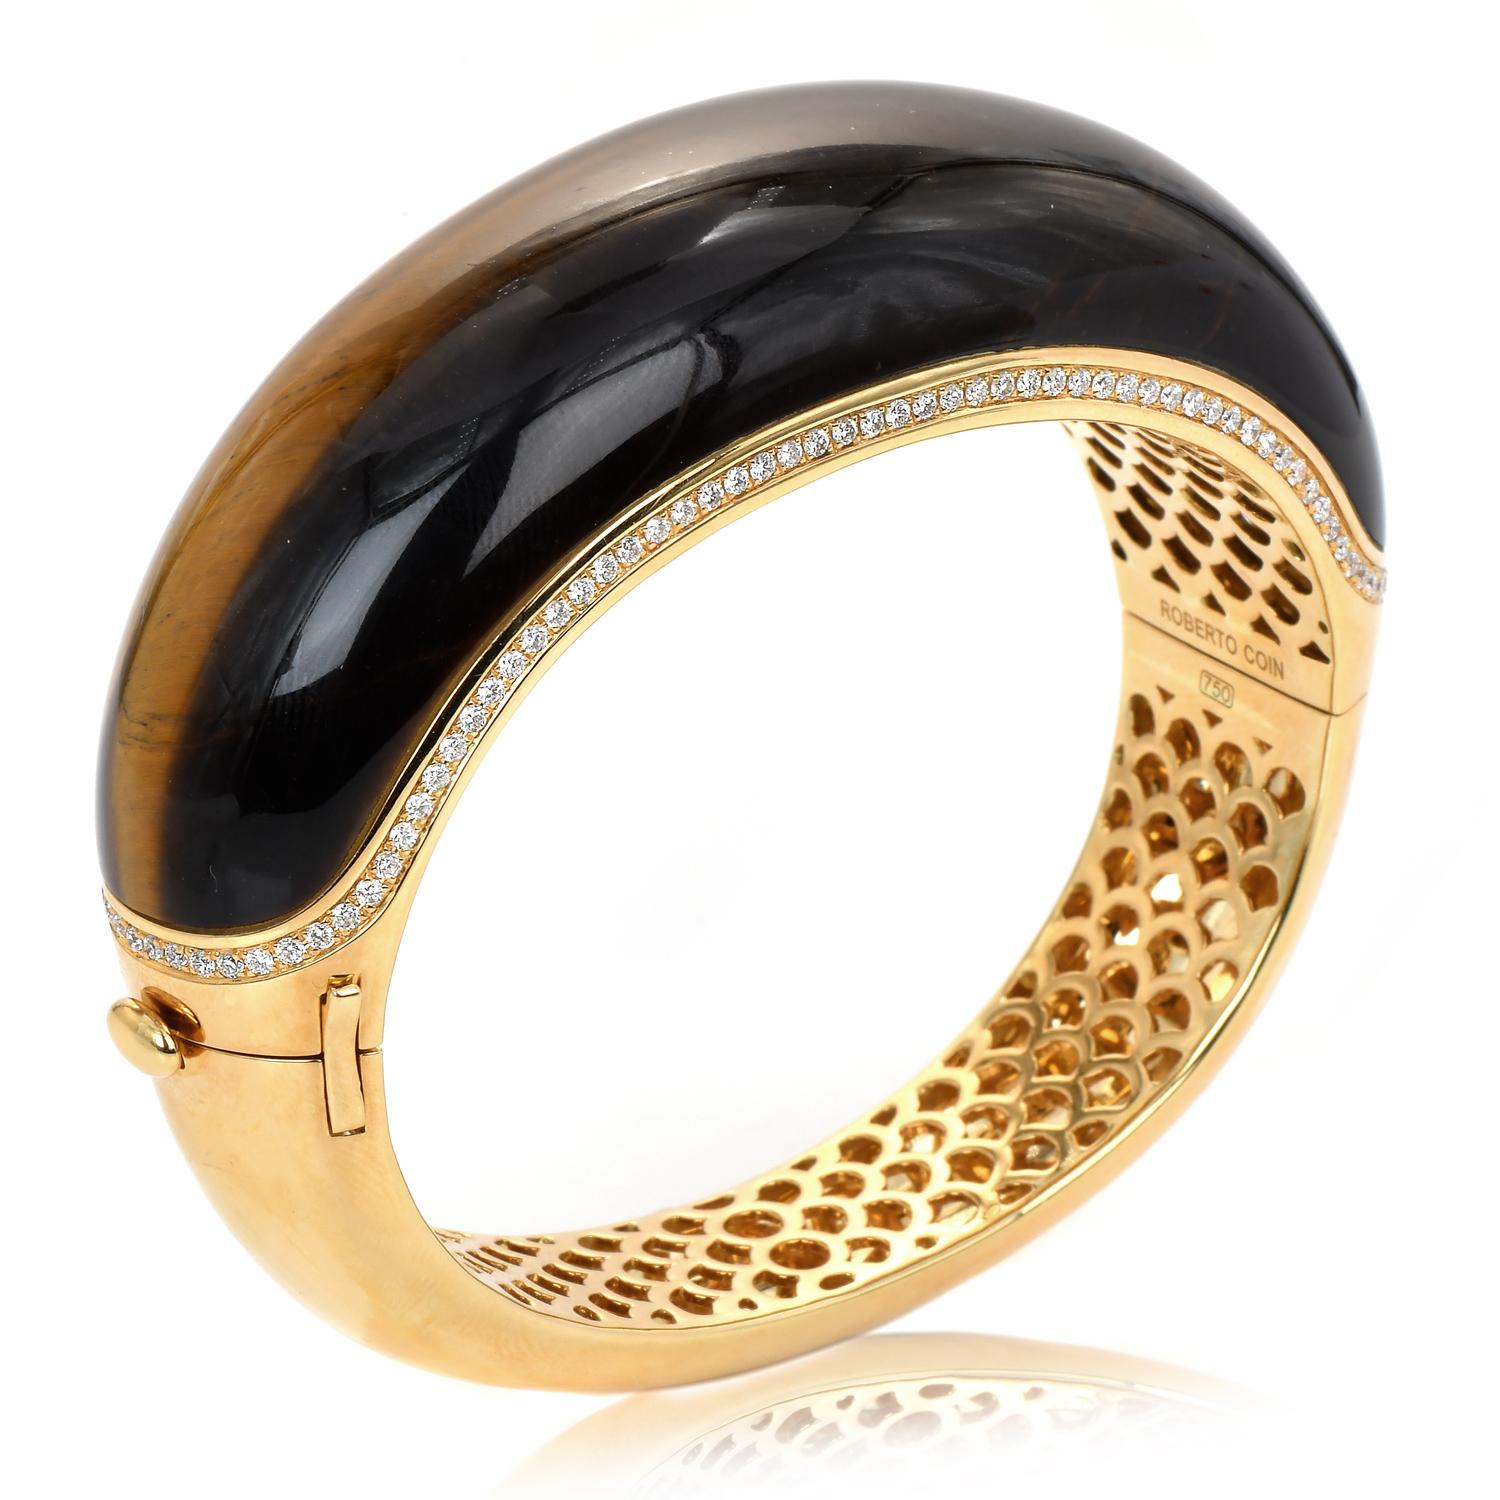 Roberto Coin Tiger's Eye Diamond 18K Yellow Gold Large Bangle Bracelet In Excellent Condition For Sale In Miami, FL